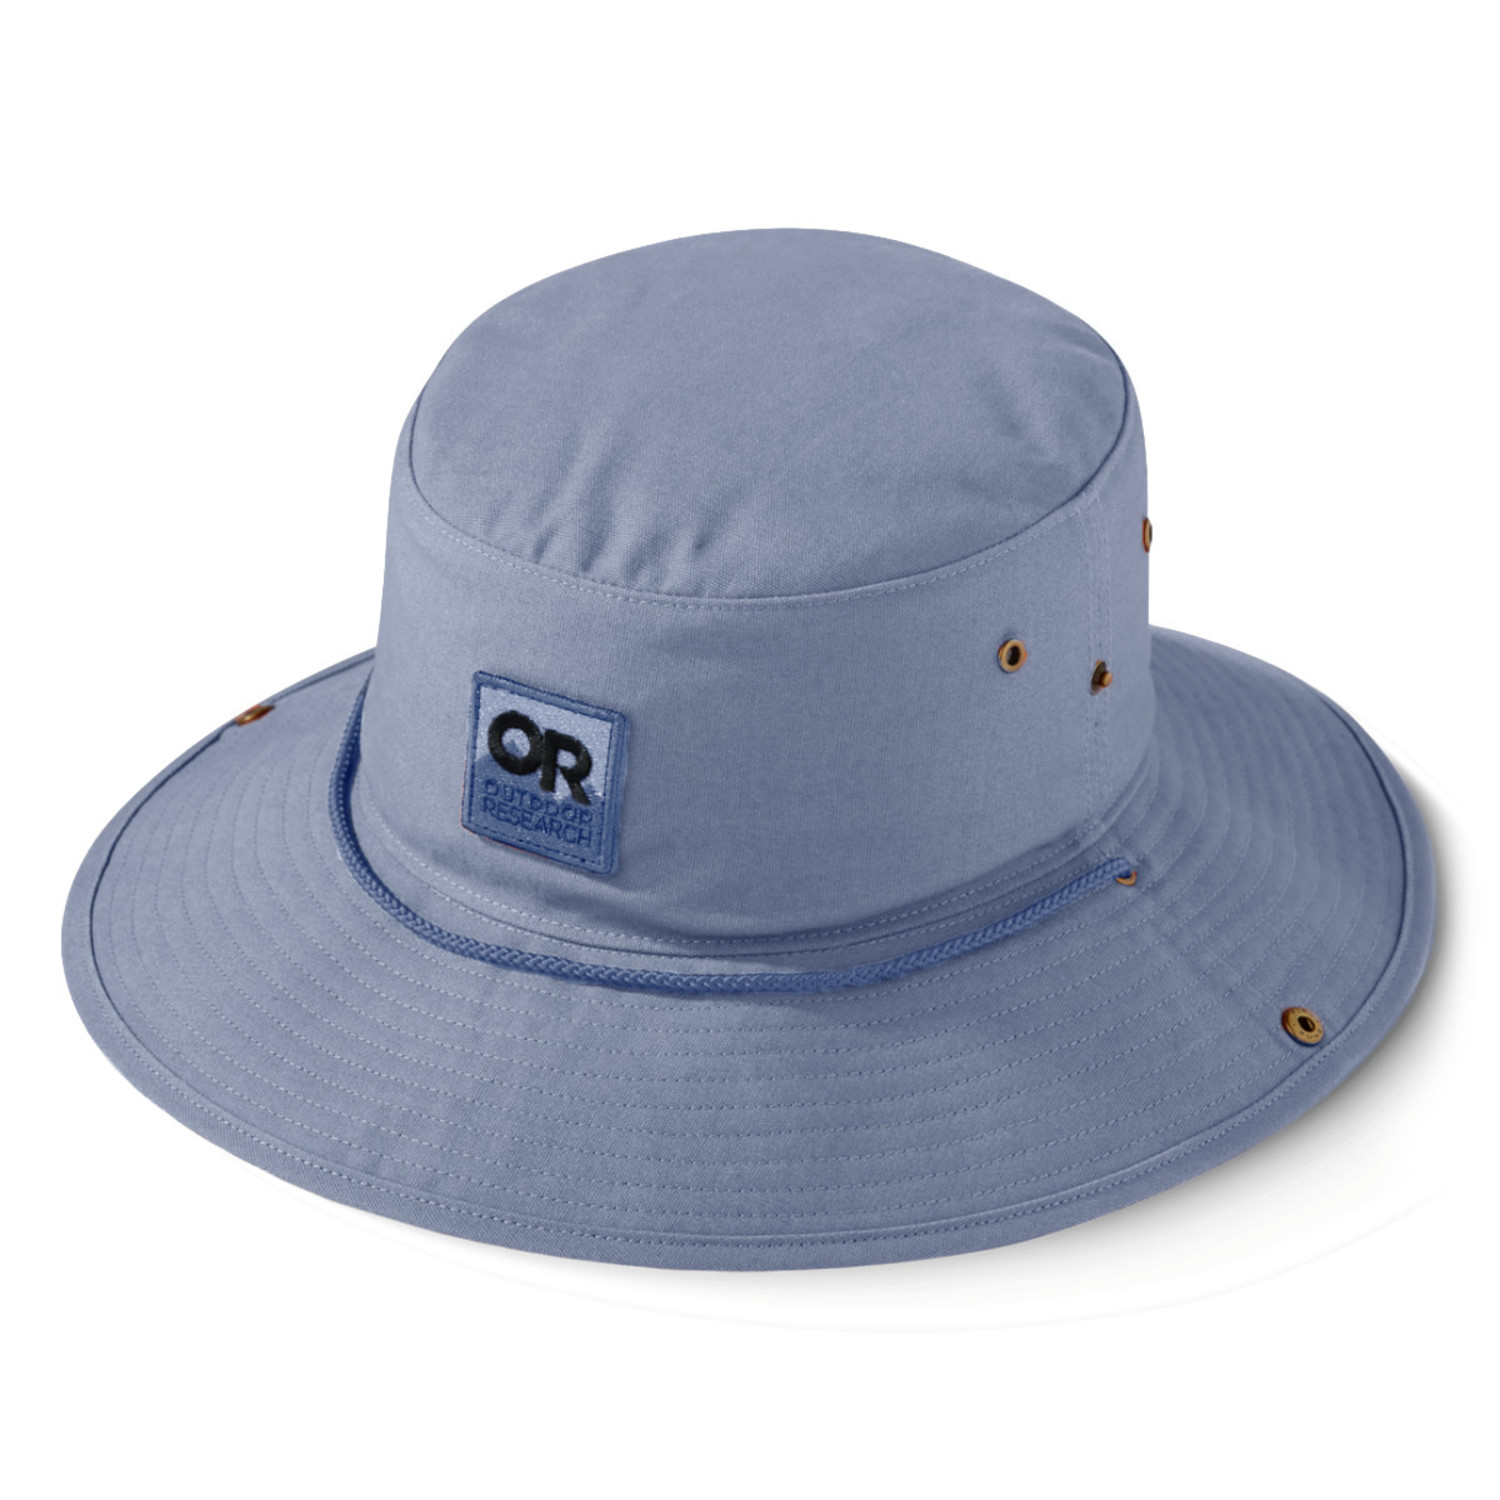 Outdoor Research Moab Sun Hat - Dawn